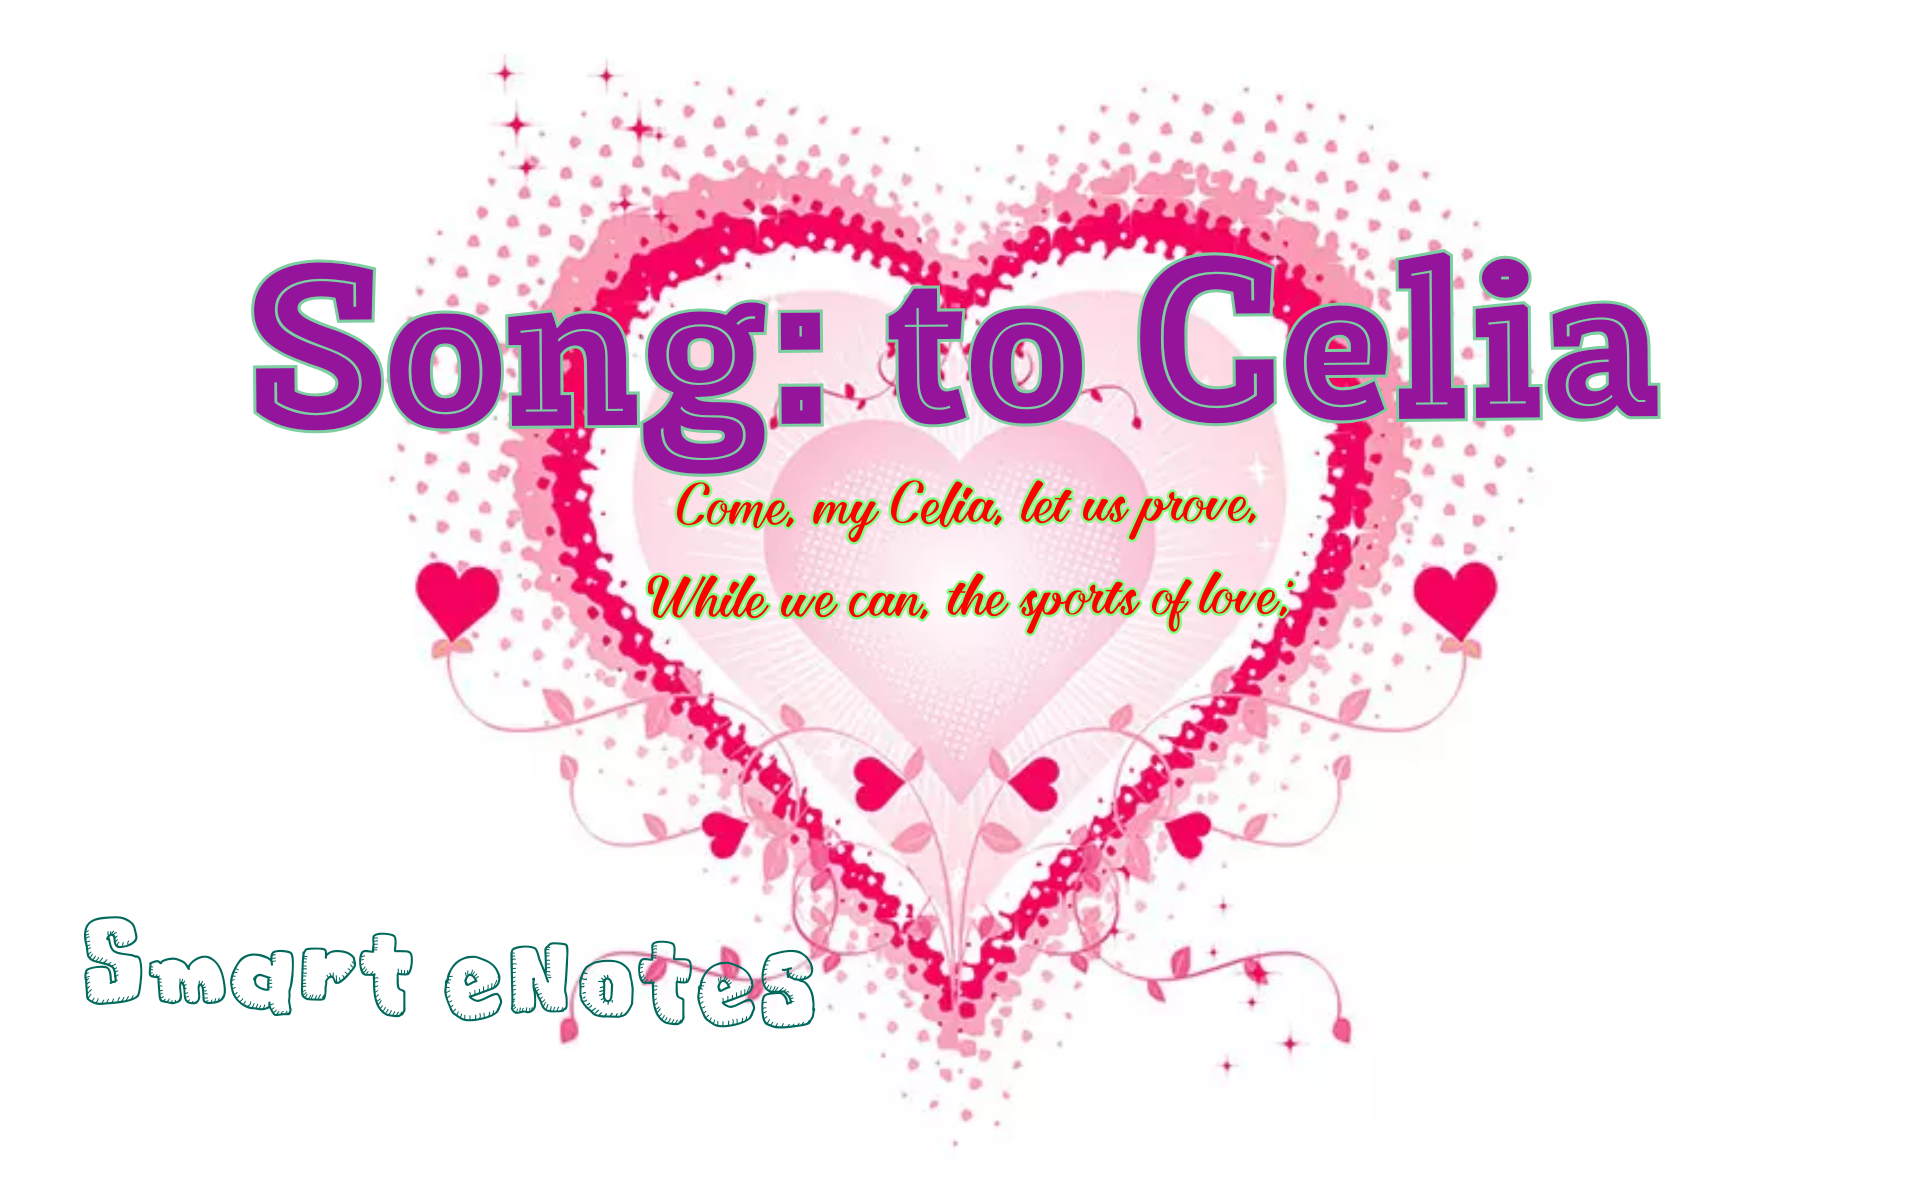 Song: to Celia [Come, my Celia, let us prove] Summary and Analysis 1